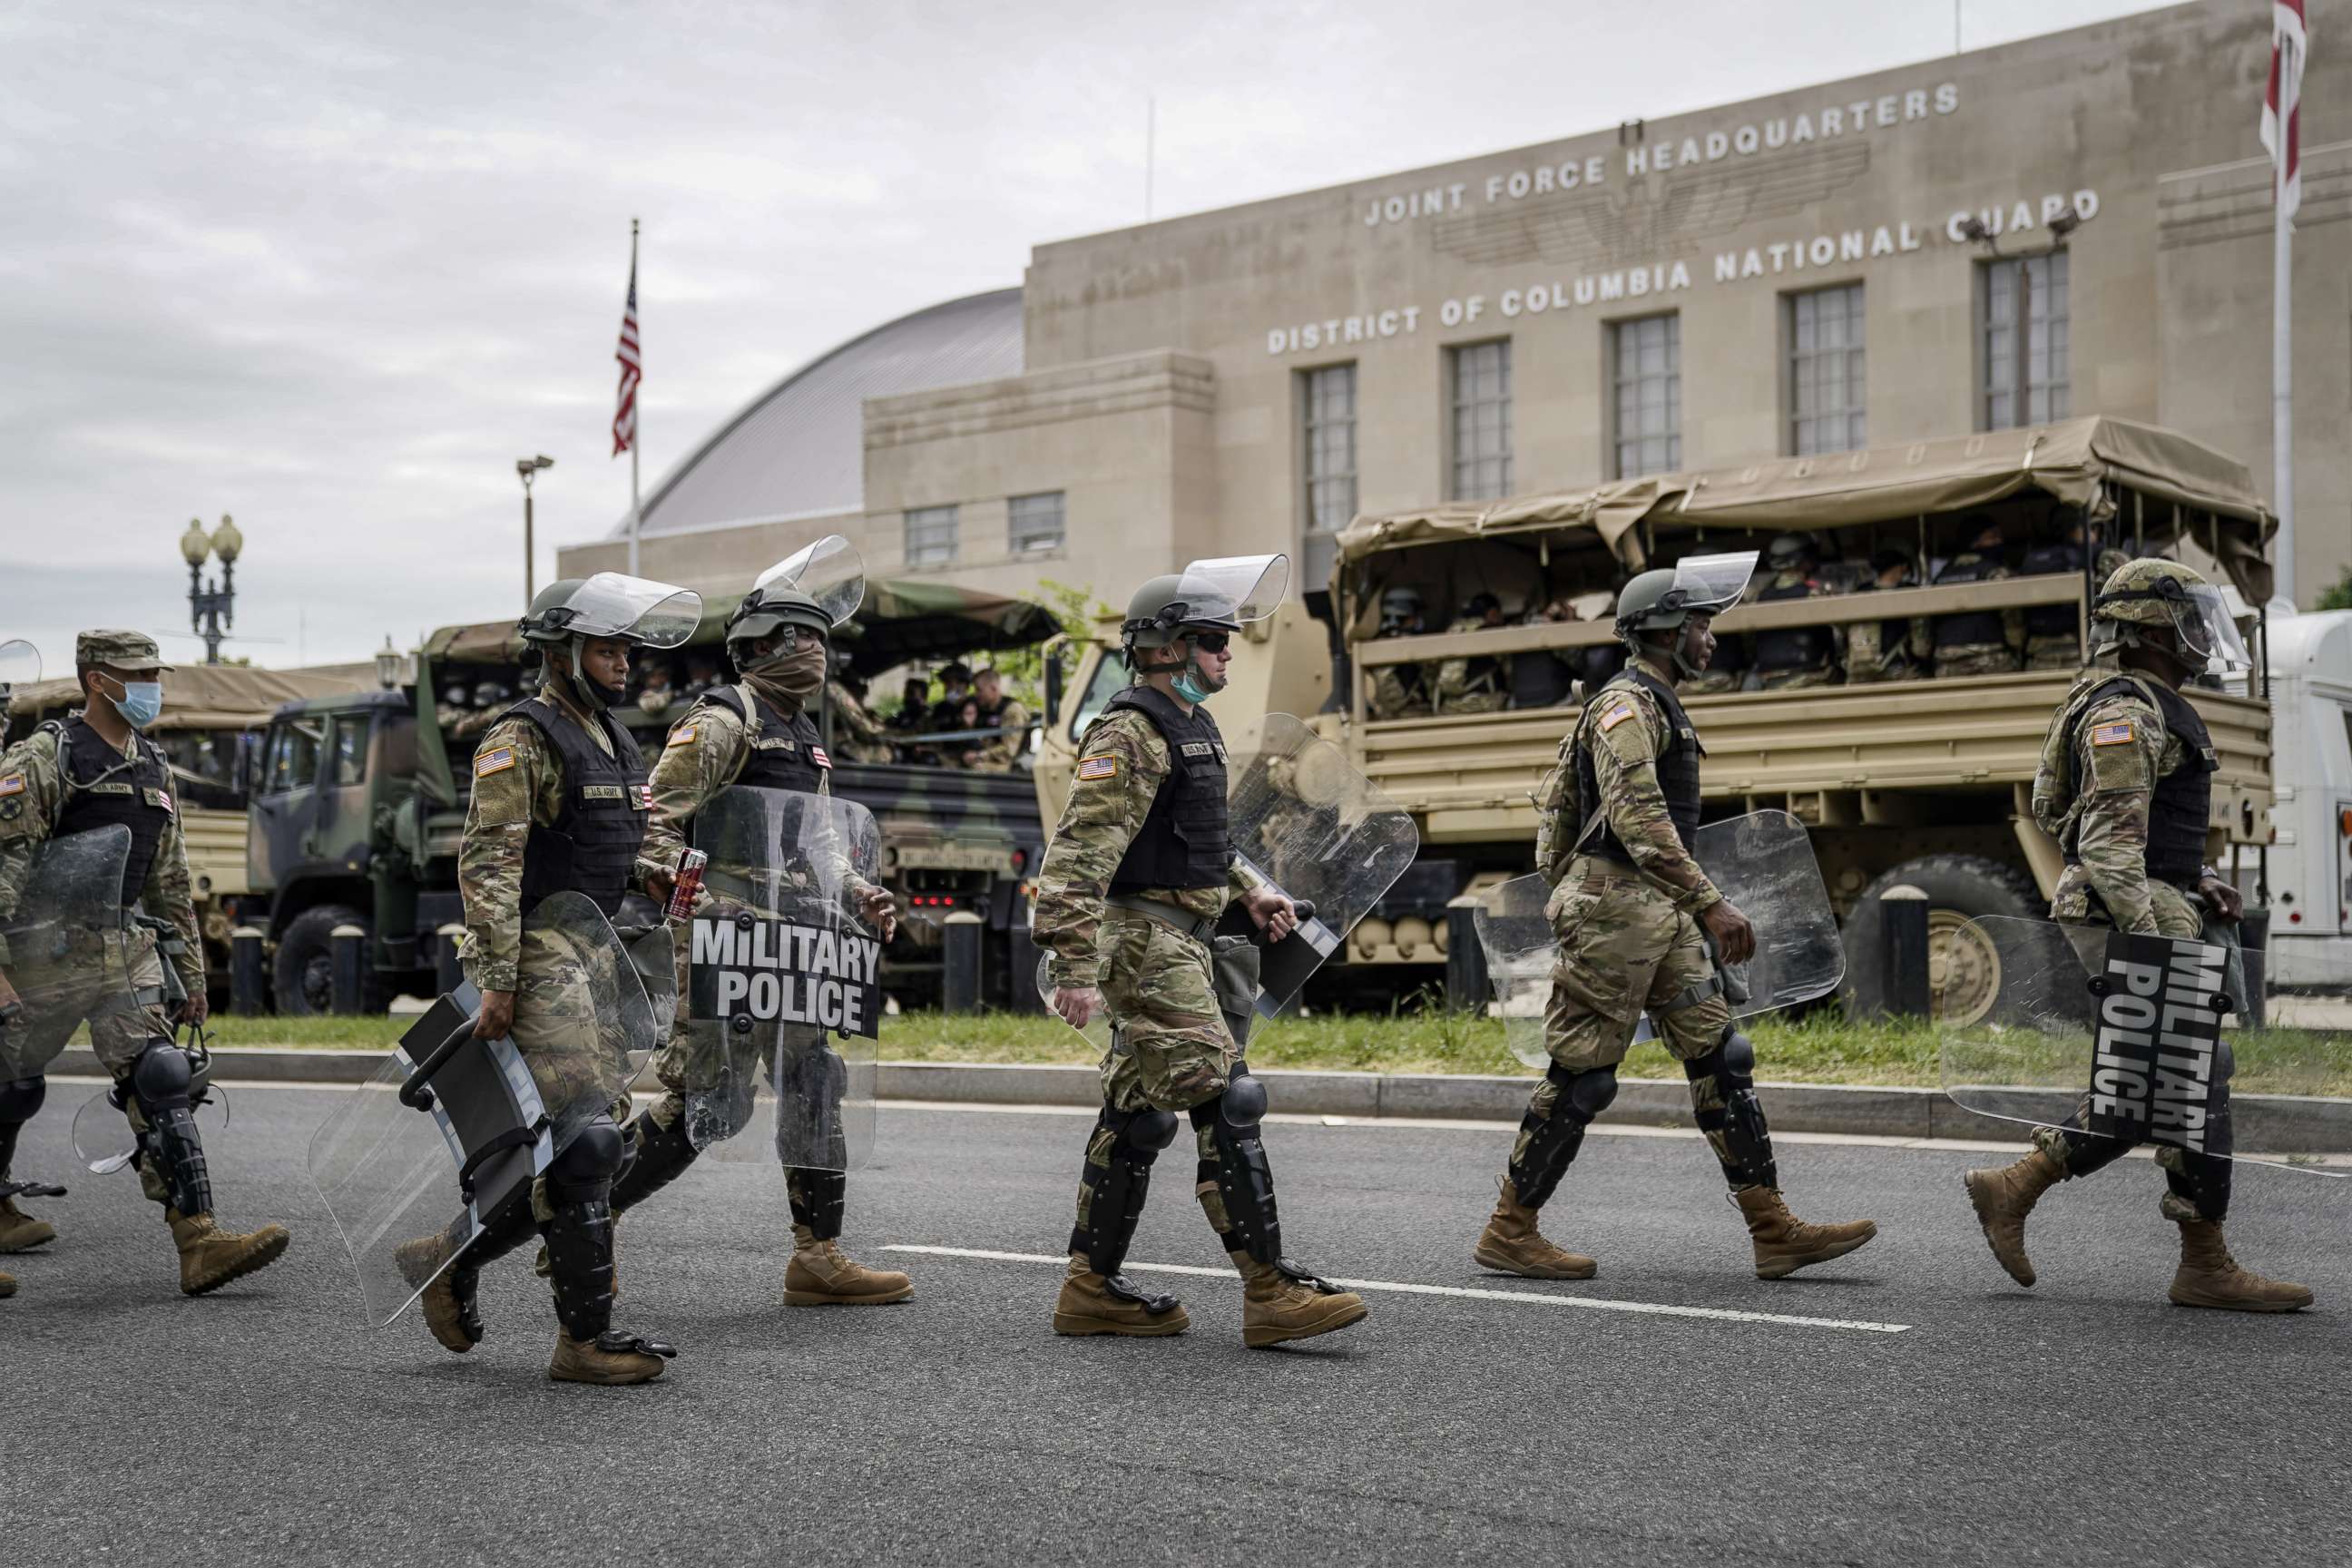 PHOTO: Troops load up into personnel carriers to take them toward the city from the Joint Force Headquarters of the D.C. National Guard on June 2, 2020 in Washington, DC.